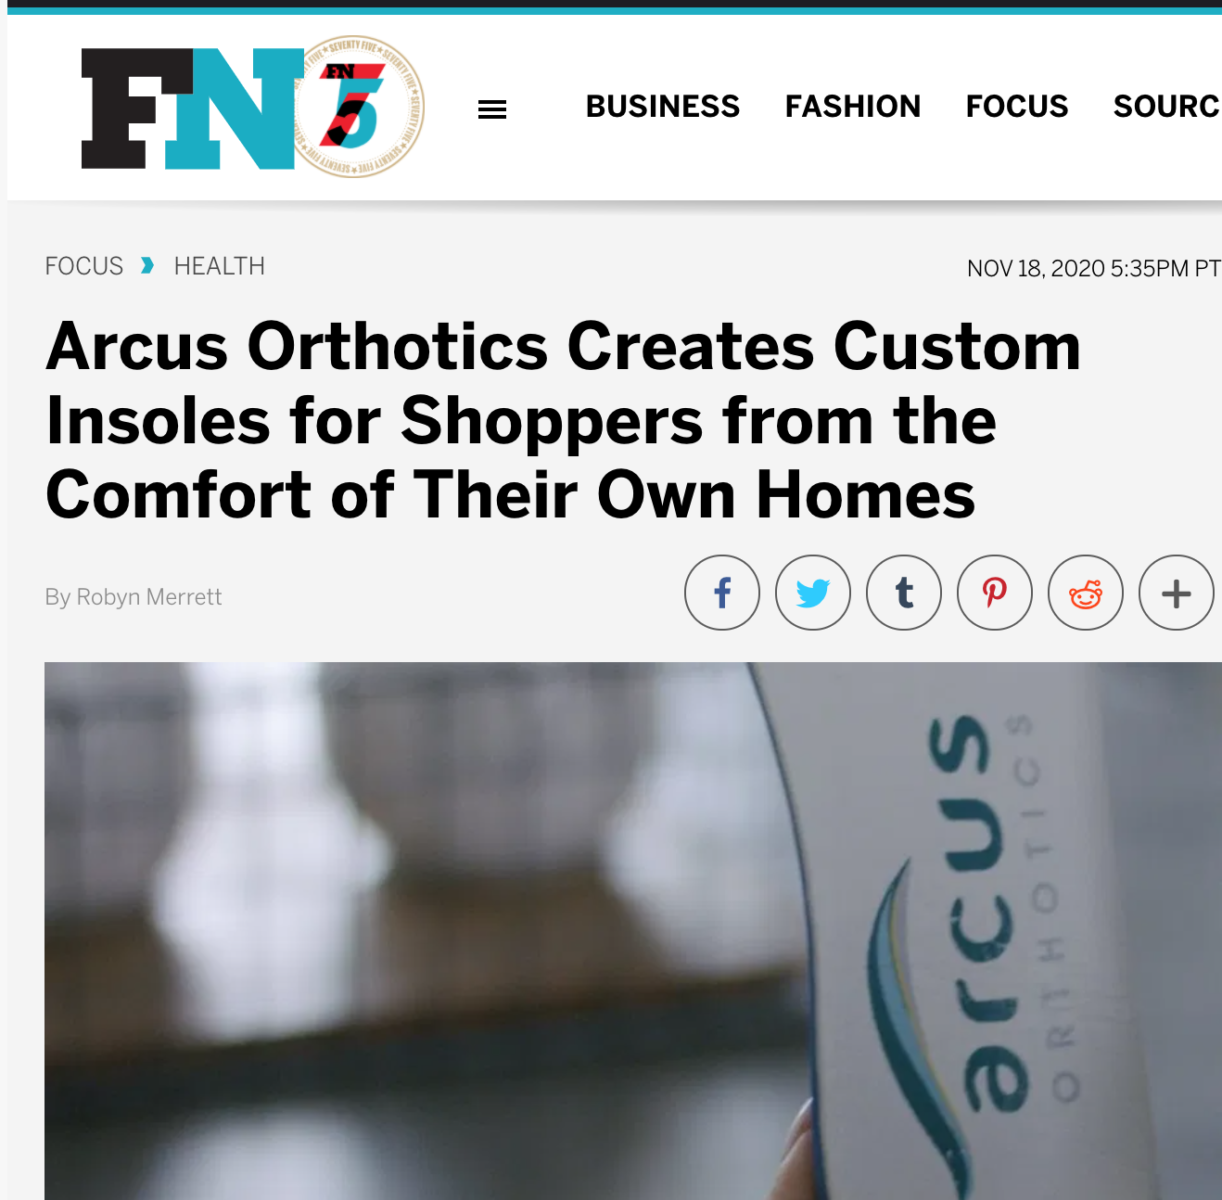 Arcus Orthotics Creates Custom Insoles for Shoppers from the Comfort of Their Own Homes